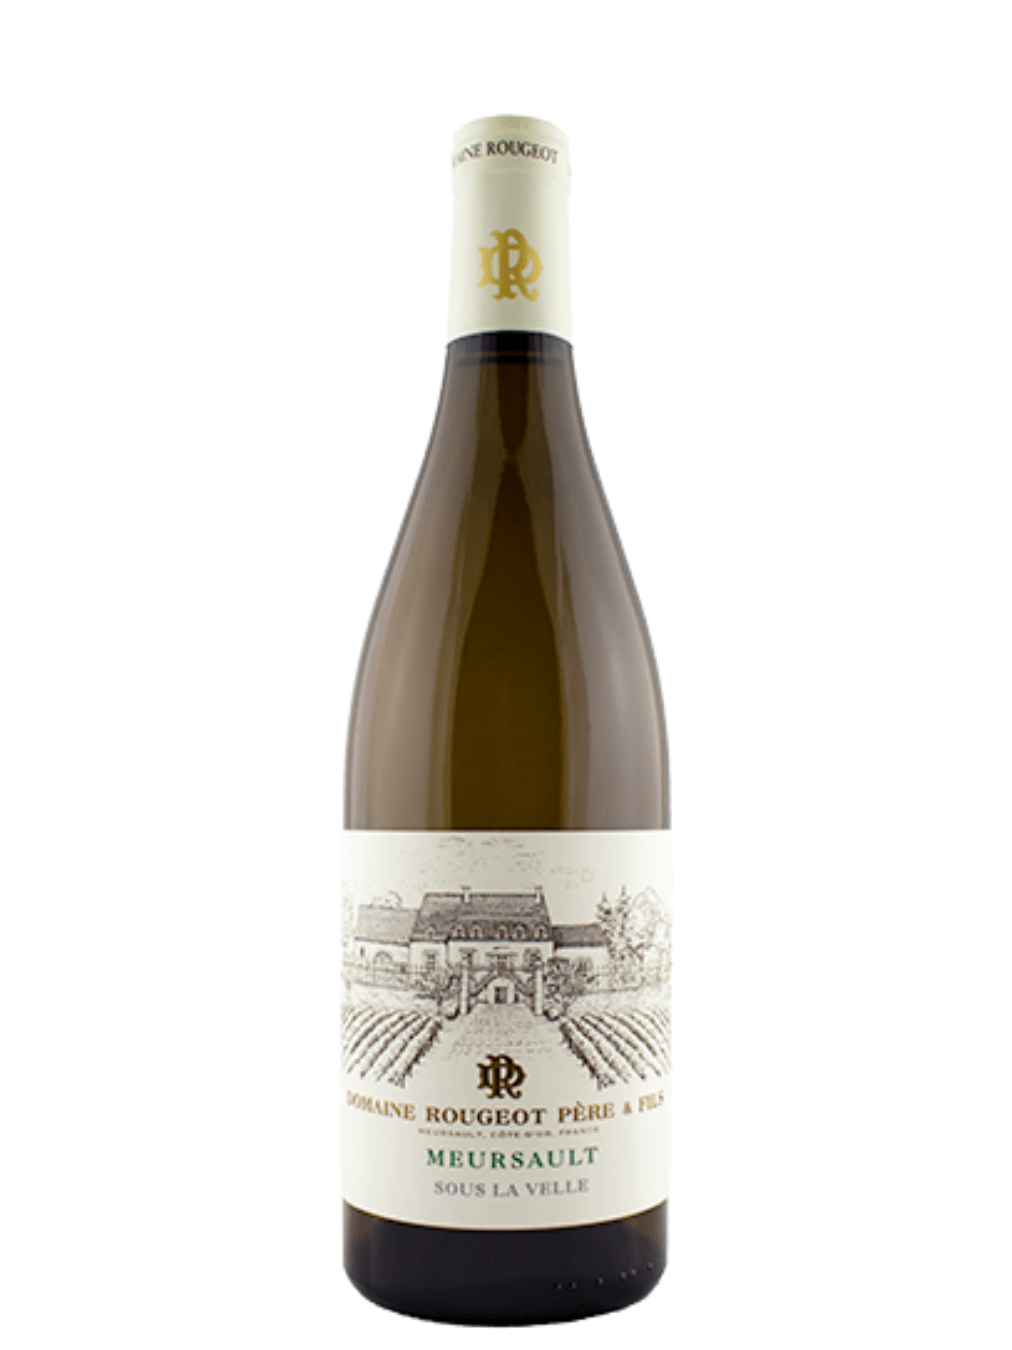 Shop Domaine Rougeot Père & Fils Domaine Rougeot Père & Fils Meursault Sous la Velle 2020 online at PENTICTON artisanal French wine store in Hong Kong. Discover other French wines, promotions, workshops and featured offers at pentictonpacific.com 